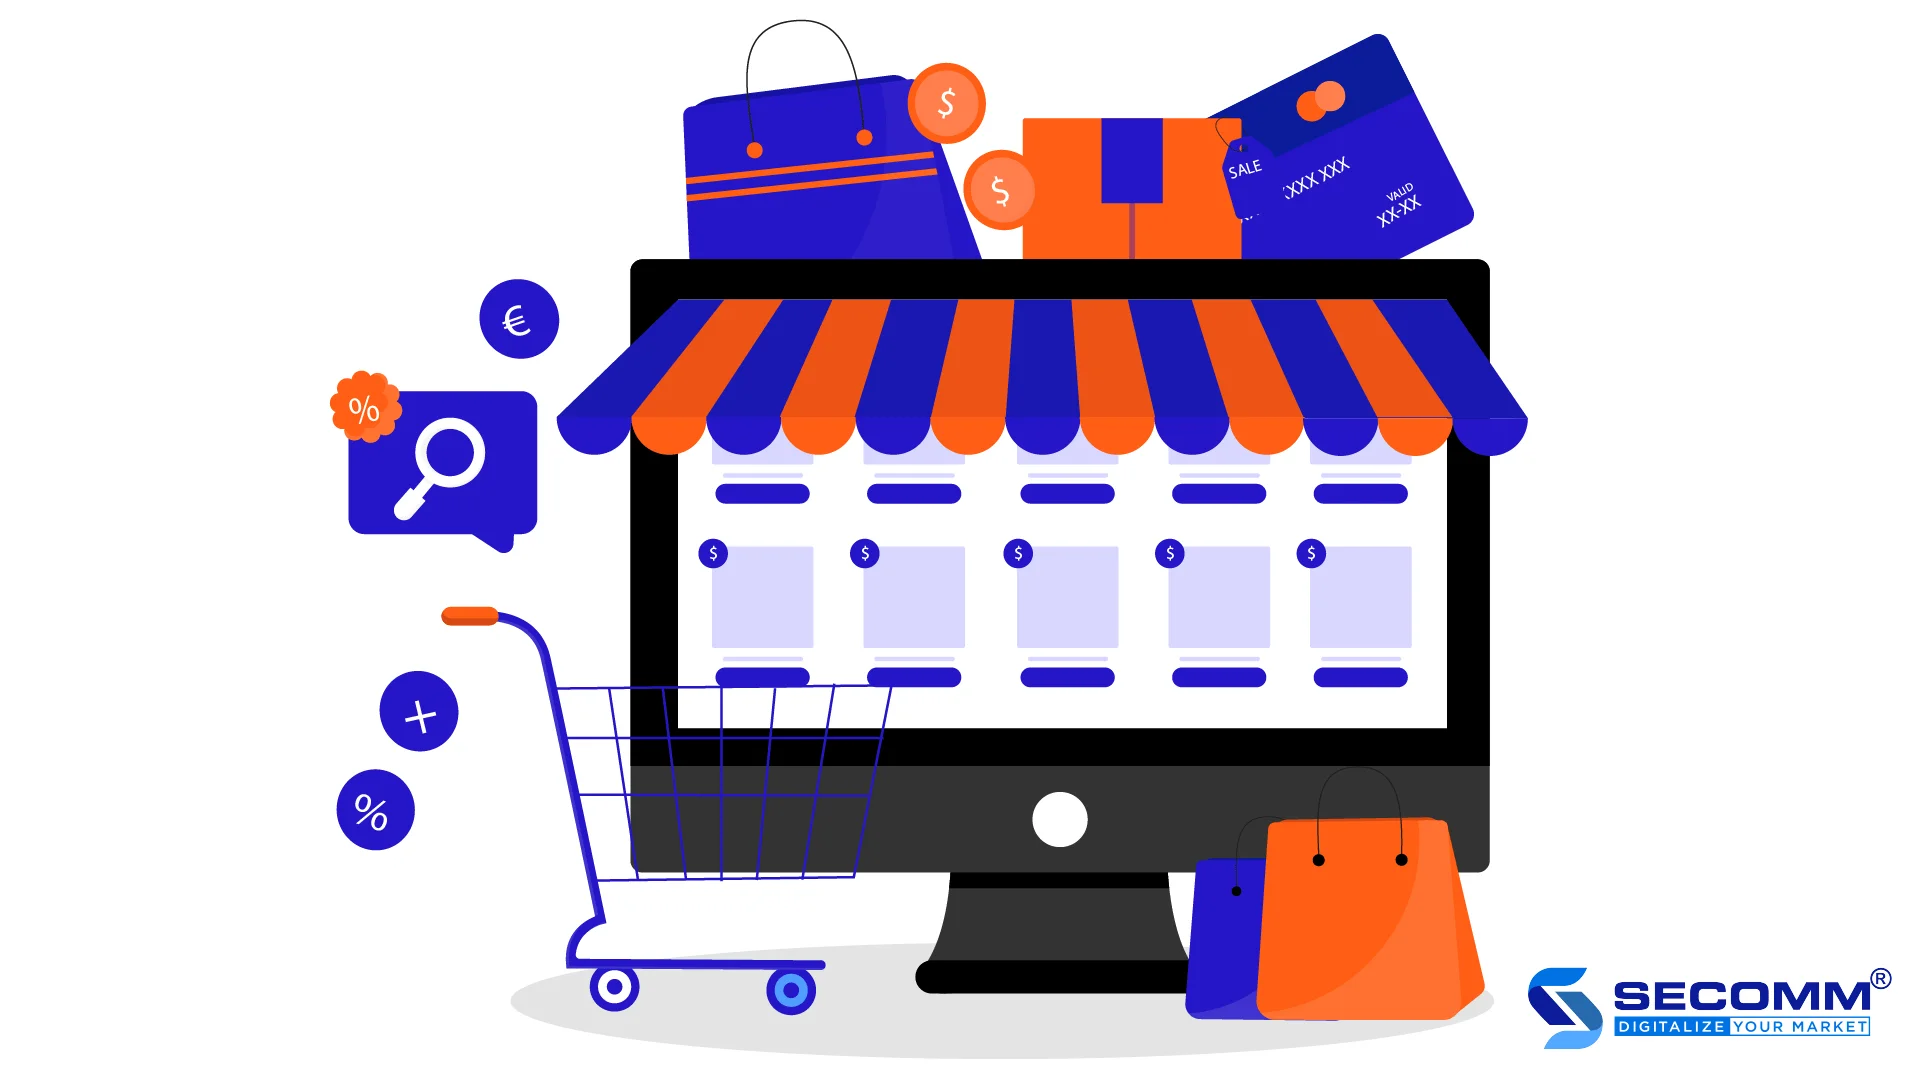 6 STEPS TO BUILD A PROFESSIONAL ECOMMERCE WEBSITE